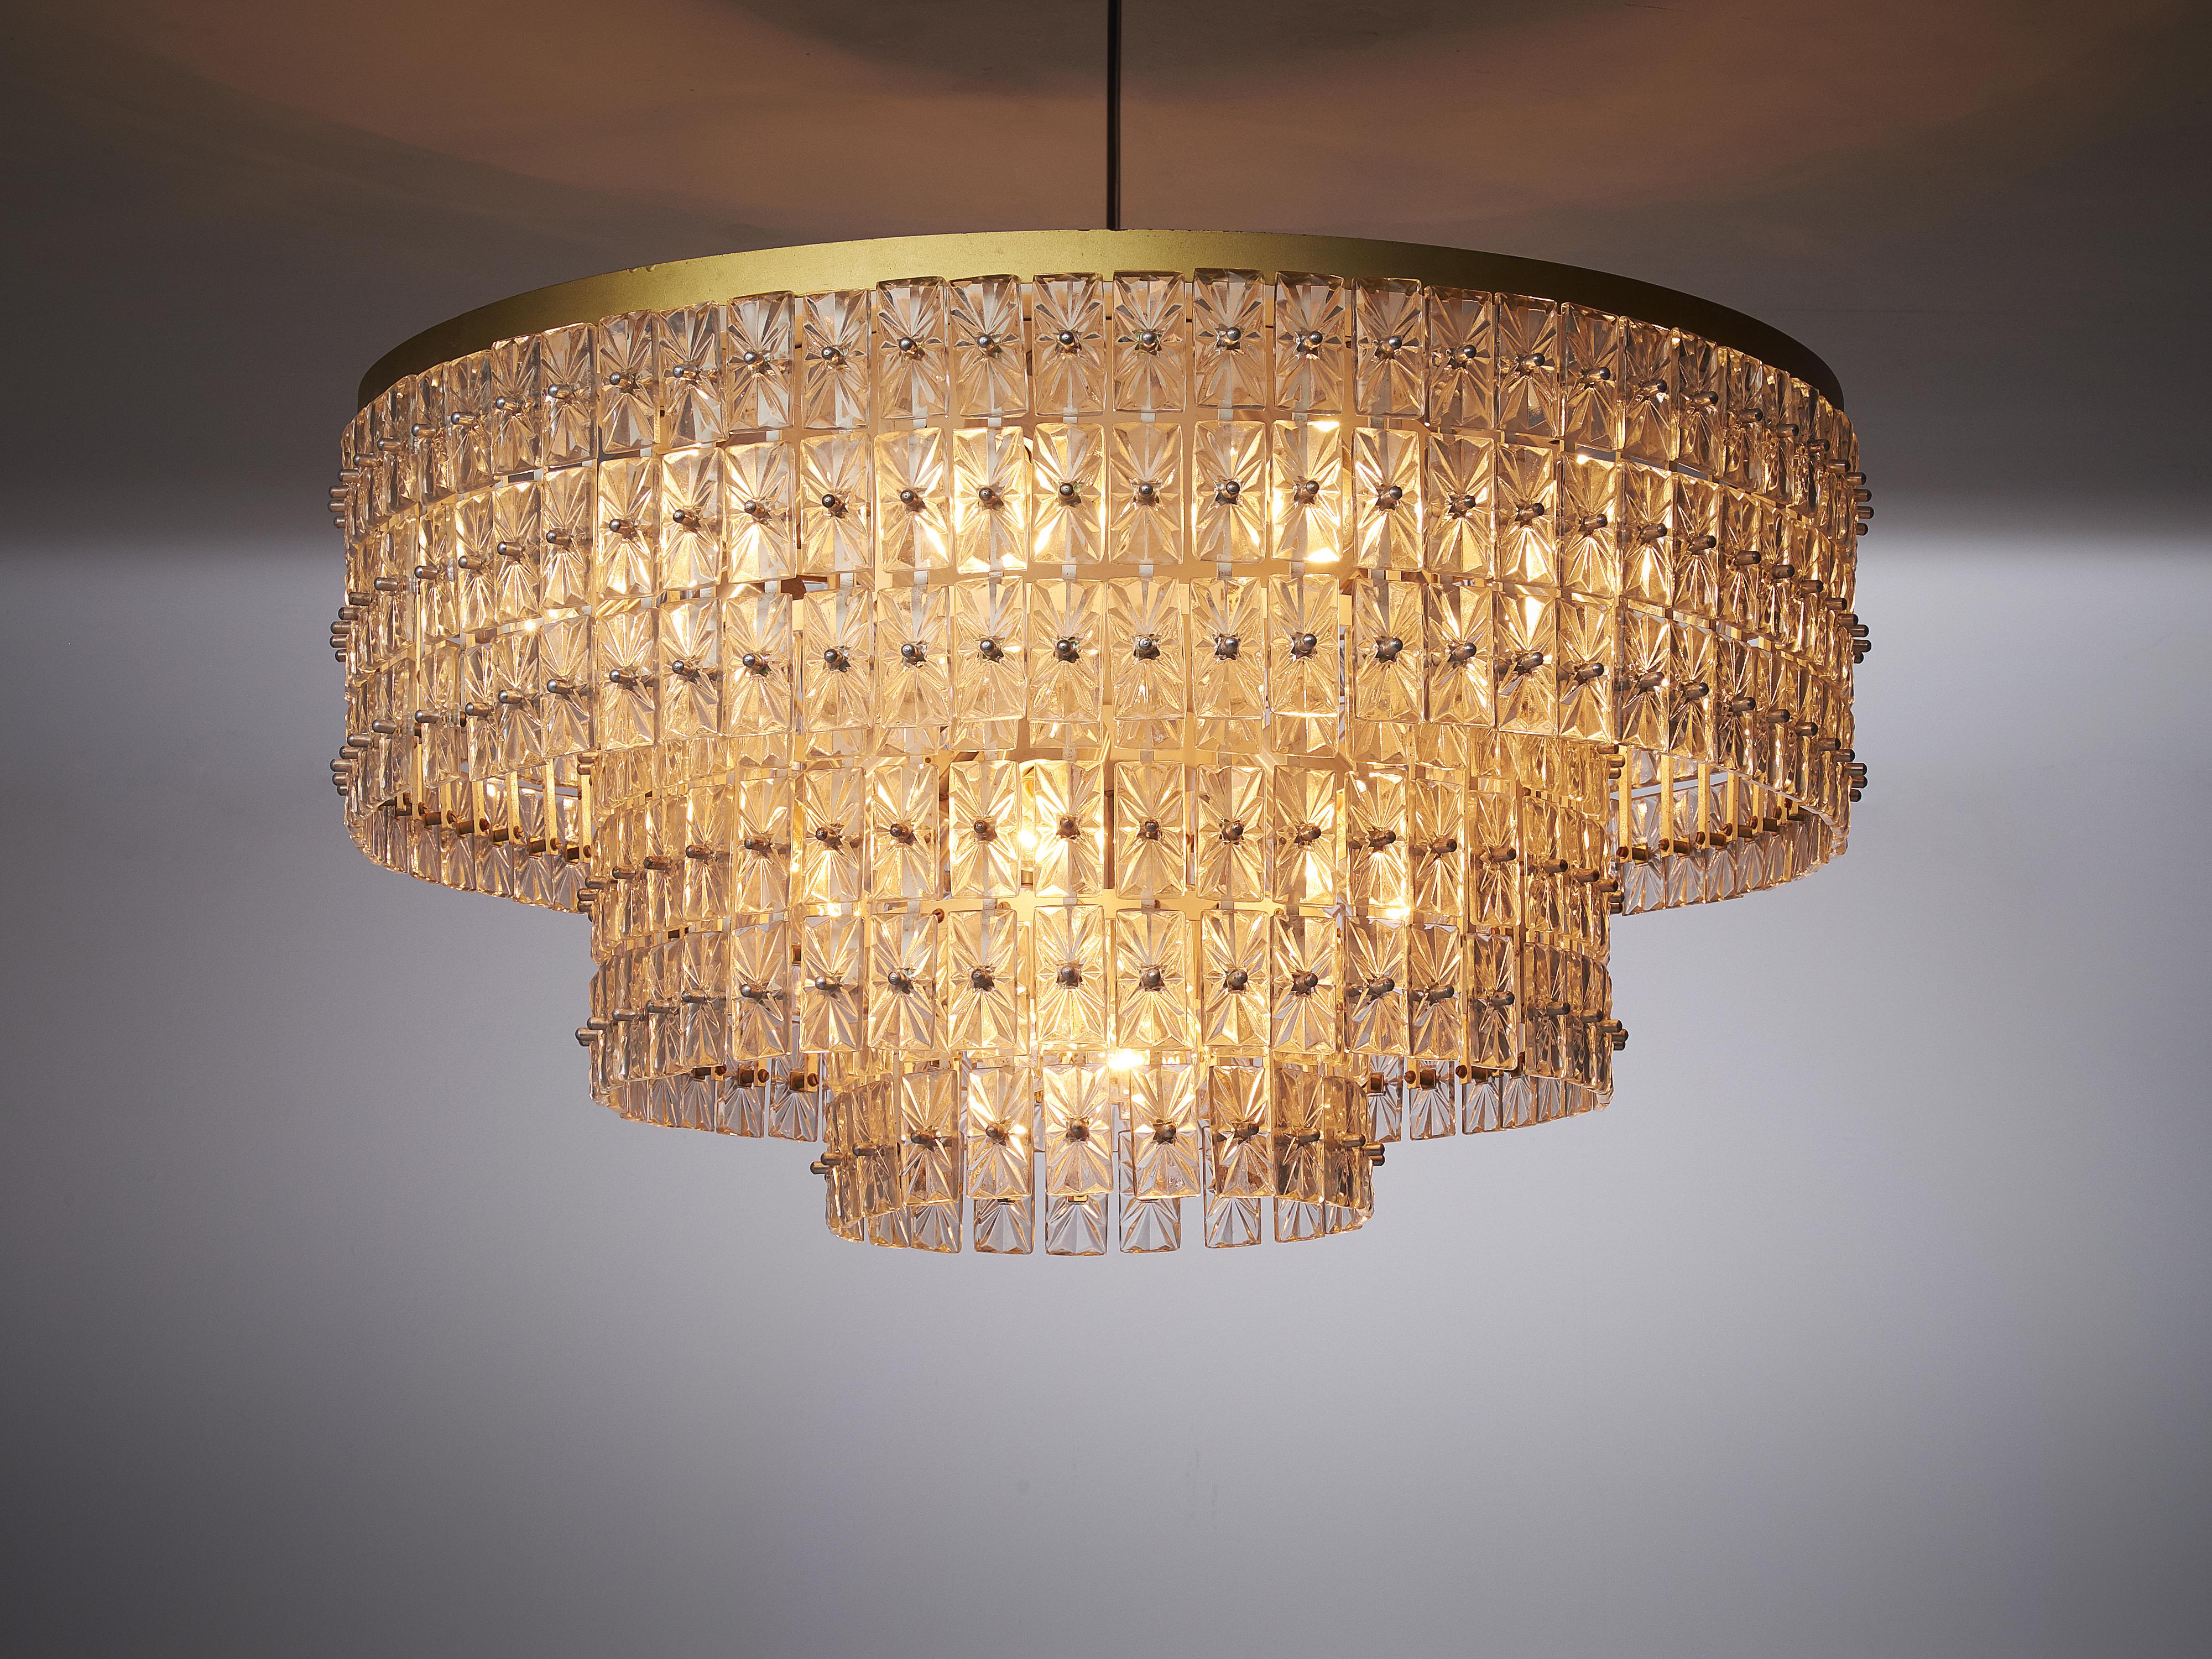 Extraordinary large chandelier in glass and brass, Austria, 1950s. Measure: 374 in.

This expressive chandelier has a round shape, built from a large amount of well detailed glass elements. They are mounted to a sincere construction and beautifully